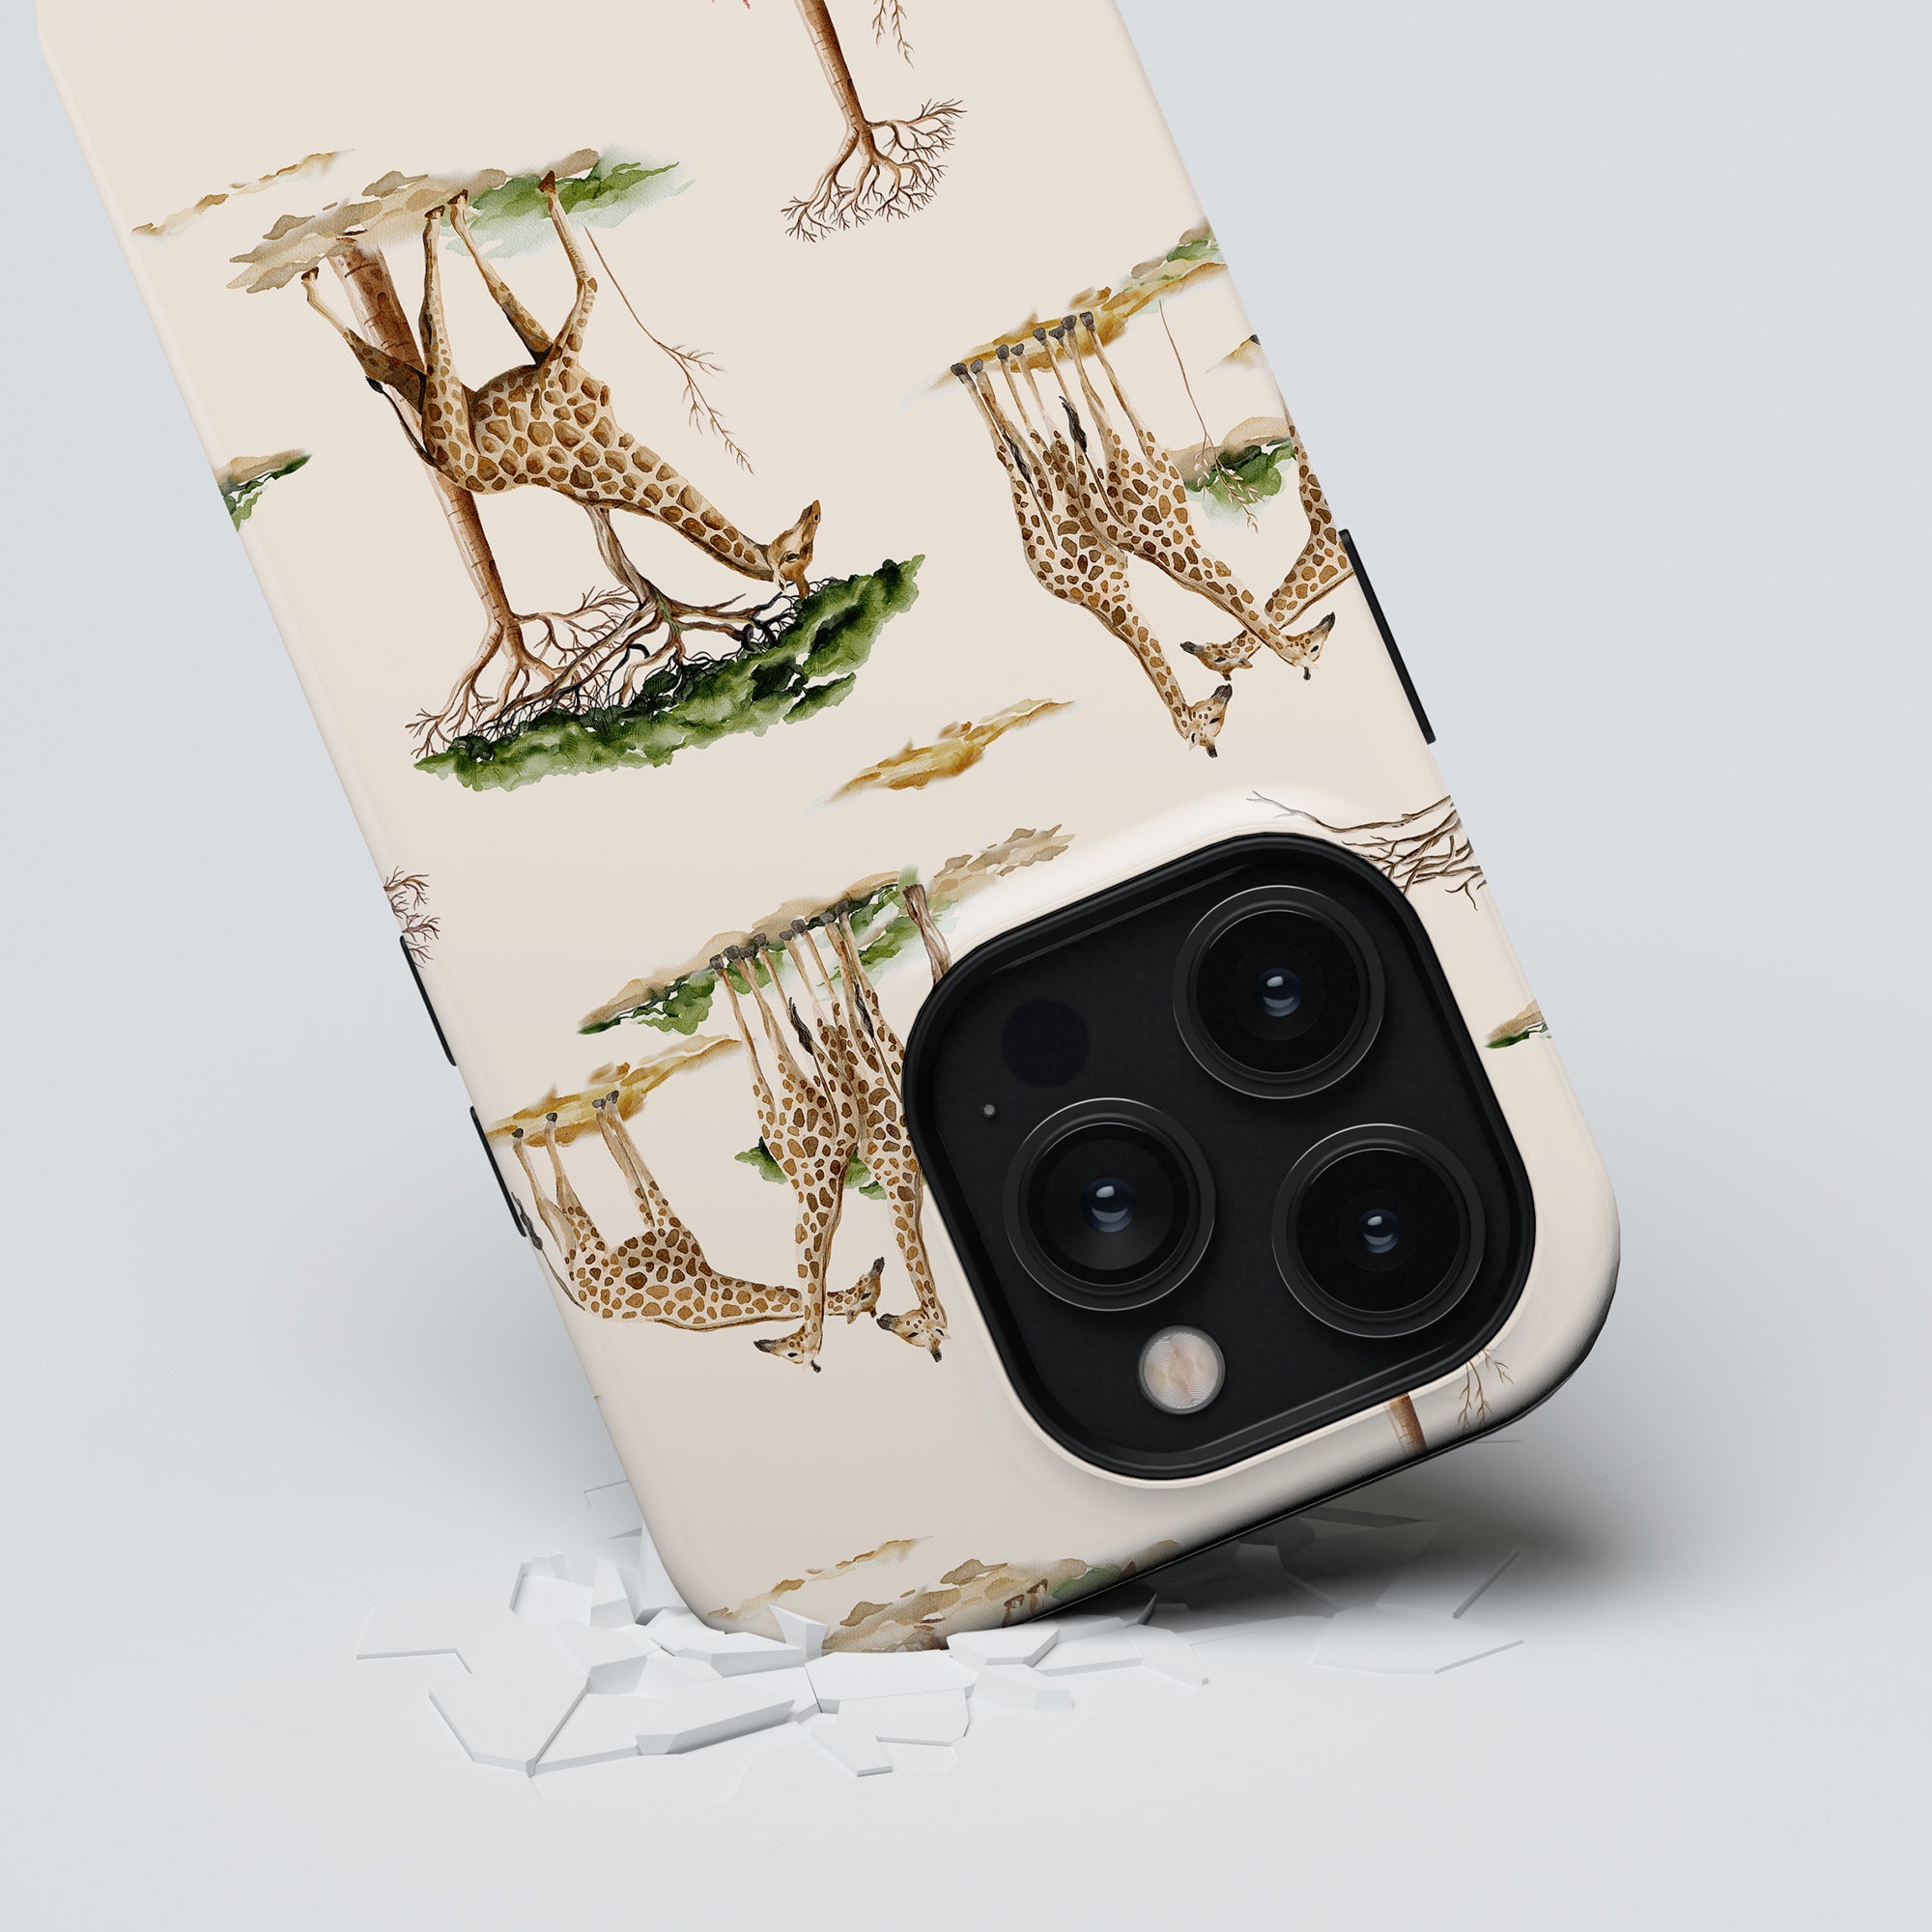 A smartphone with a Giraffa - Tough Case rests on a white surface, with several pieces of polymer from the case scattered around. The phone's triple camera lenses are prominently visible.